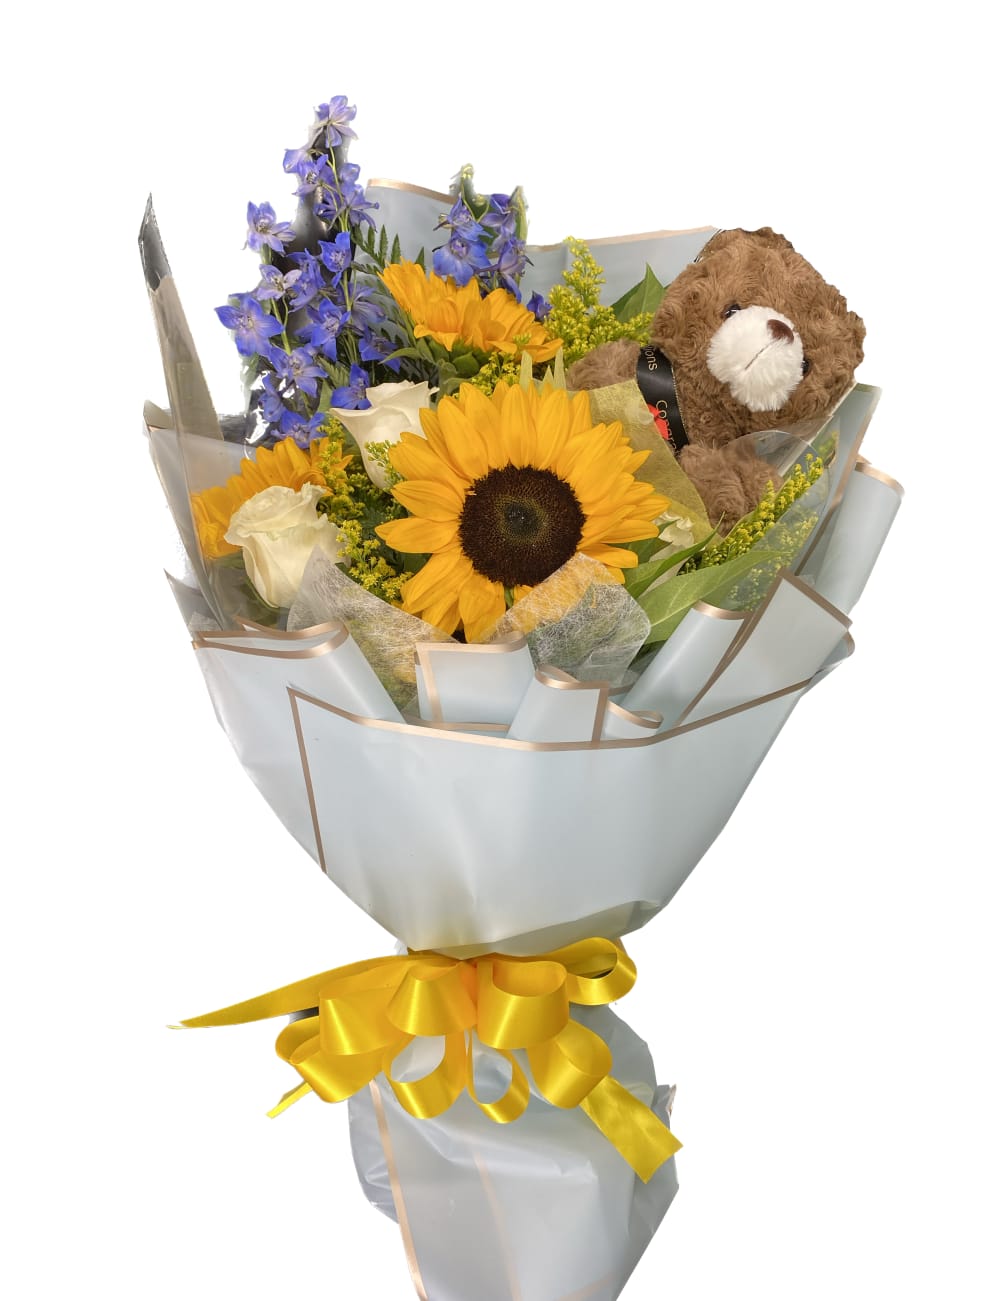 Celebrate your special day with a Hand Tie bouquet, wrapped in Hong